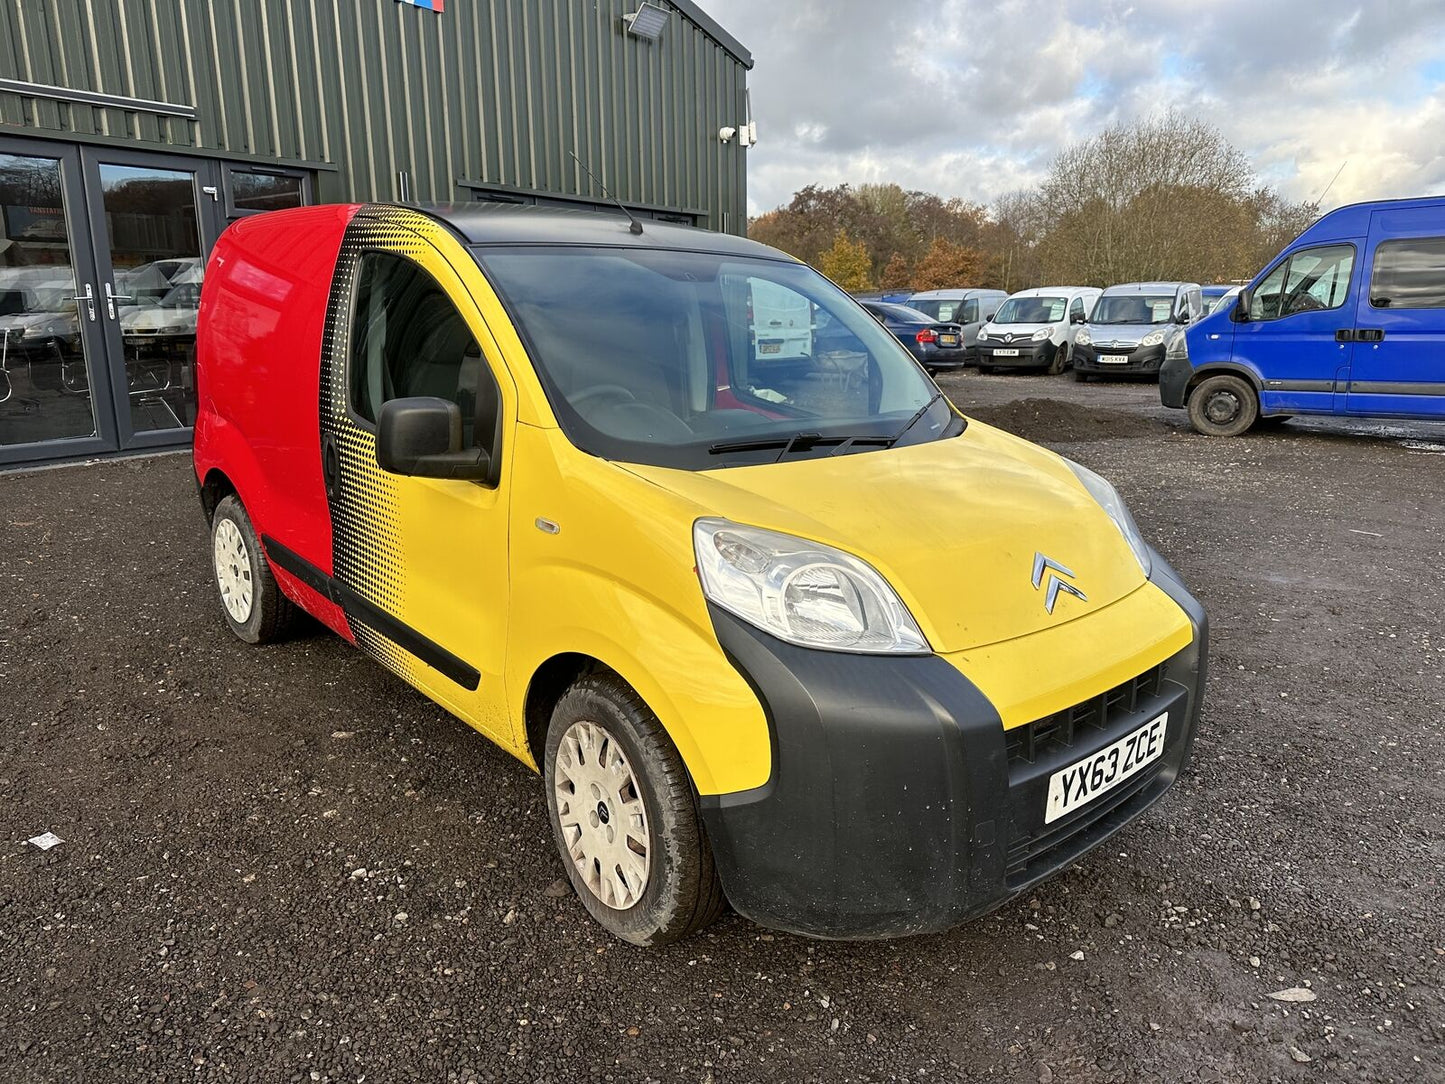 Bid on TRUSTY TRANSPORTER: CITROEN NEMO BIPPER, PART SERVICE HISTORY - NO VAT ON HAMMER- Buy &amp; Sell on Auction with EAMA Group